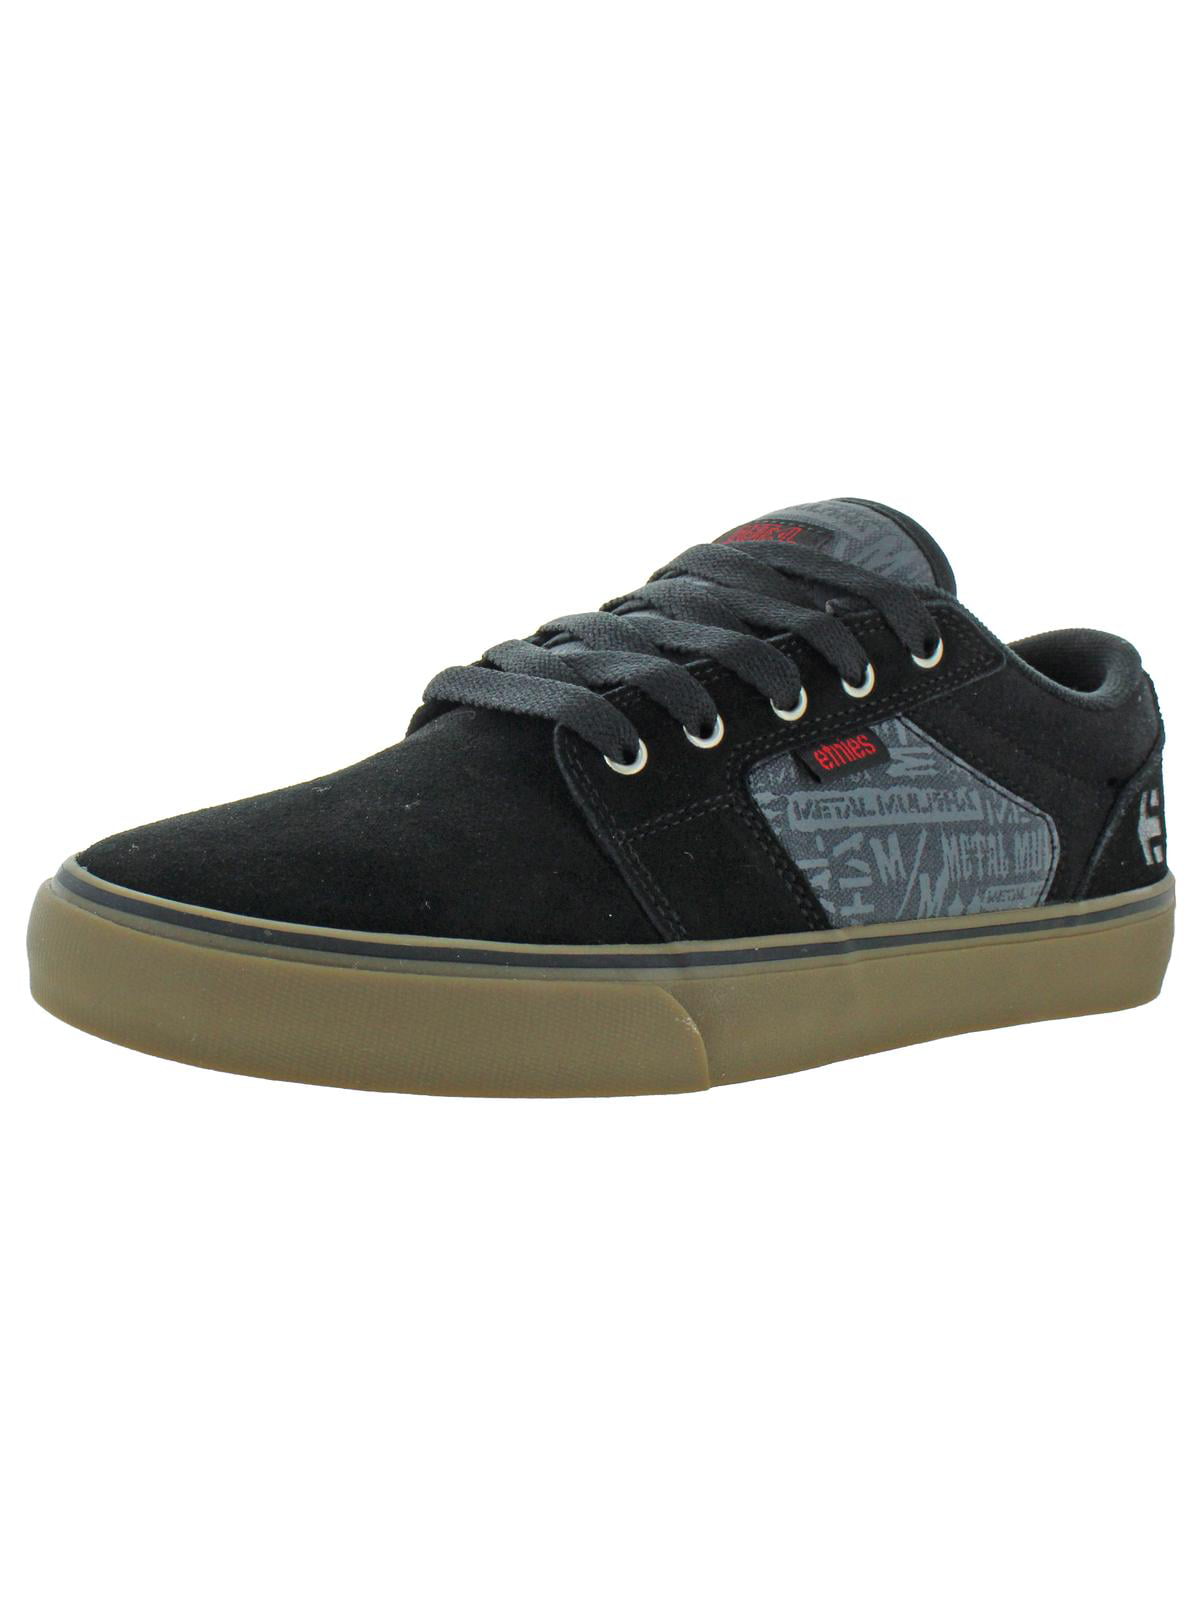 mens leather skate shoes